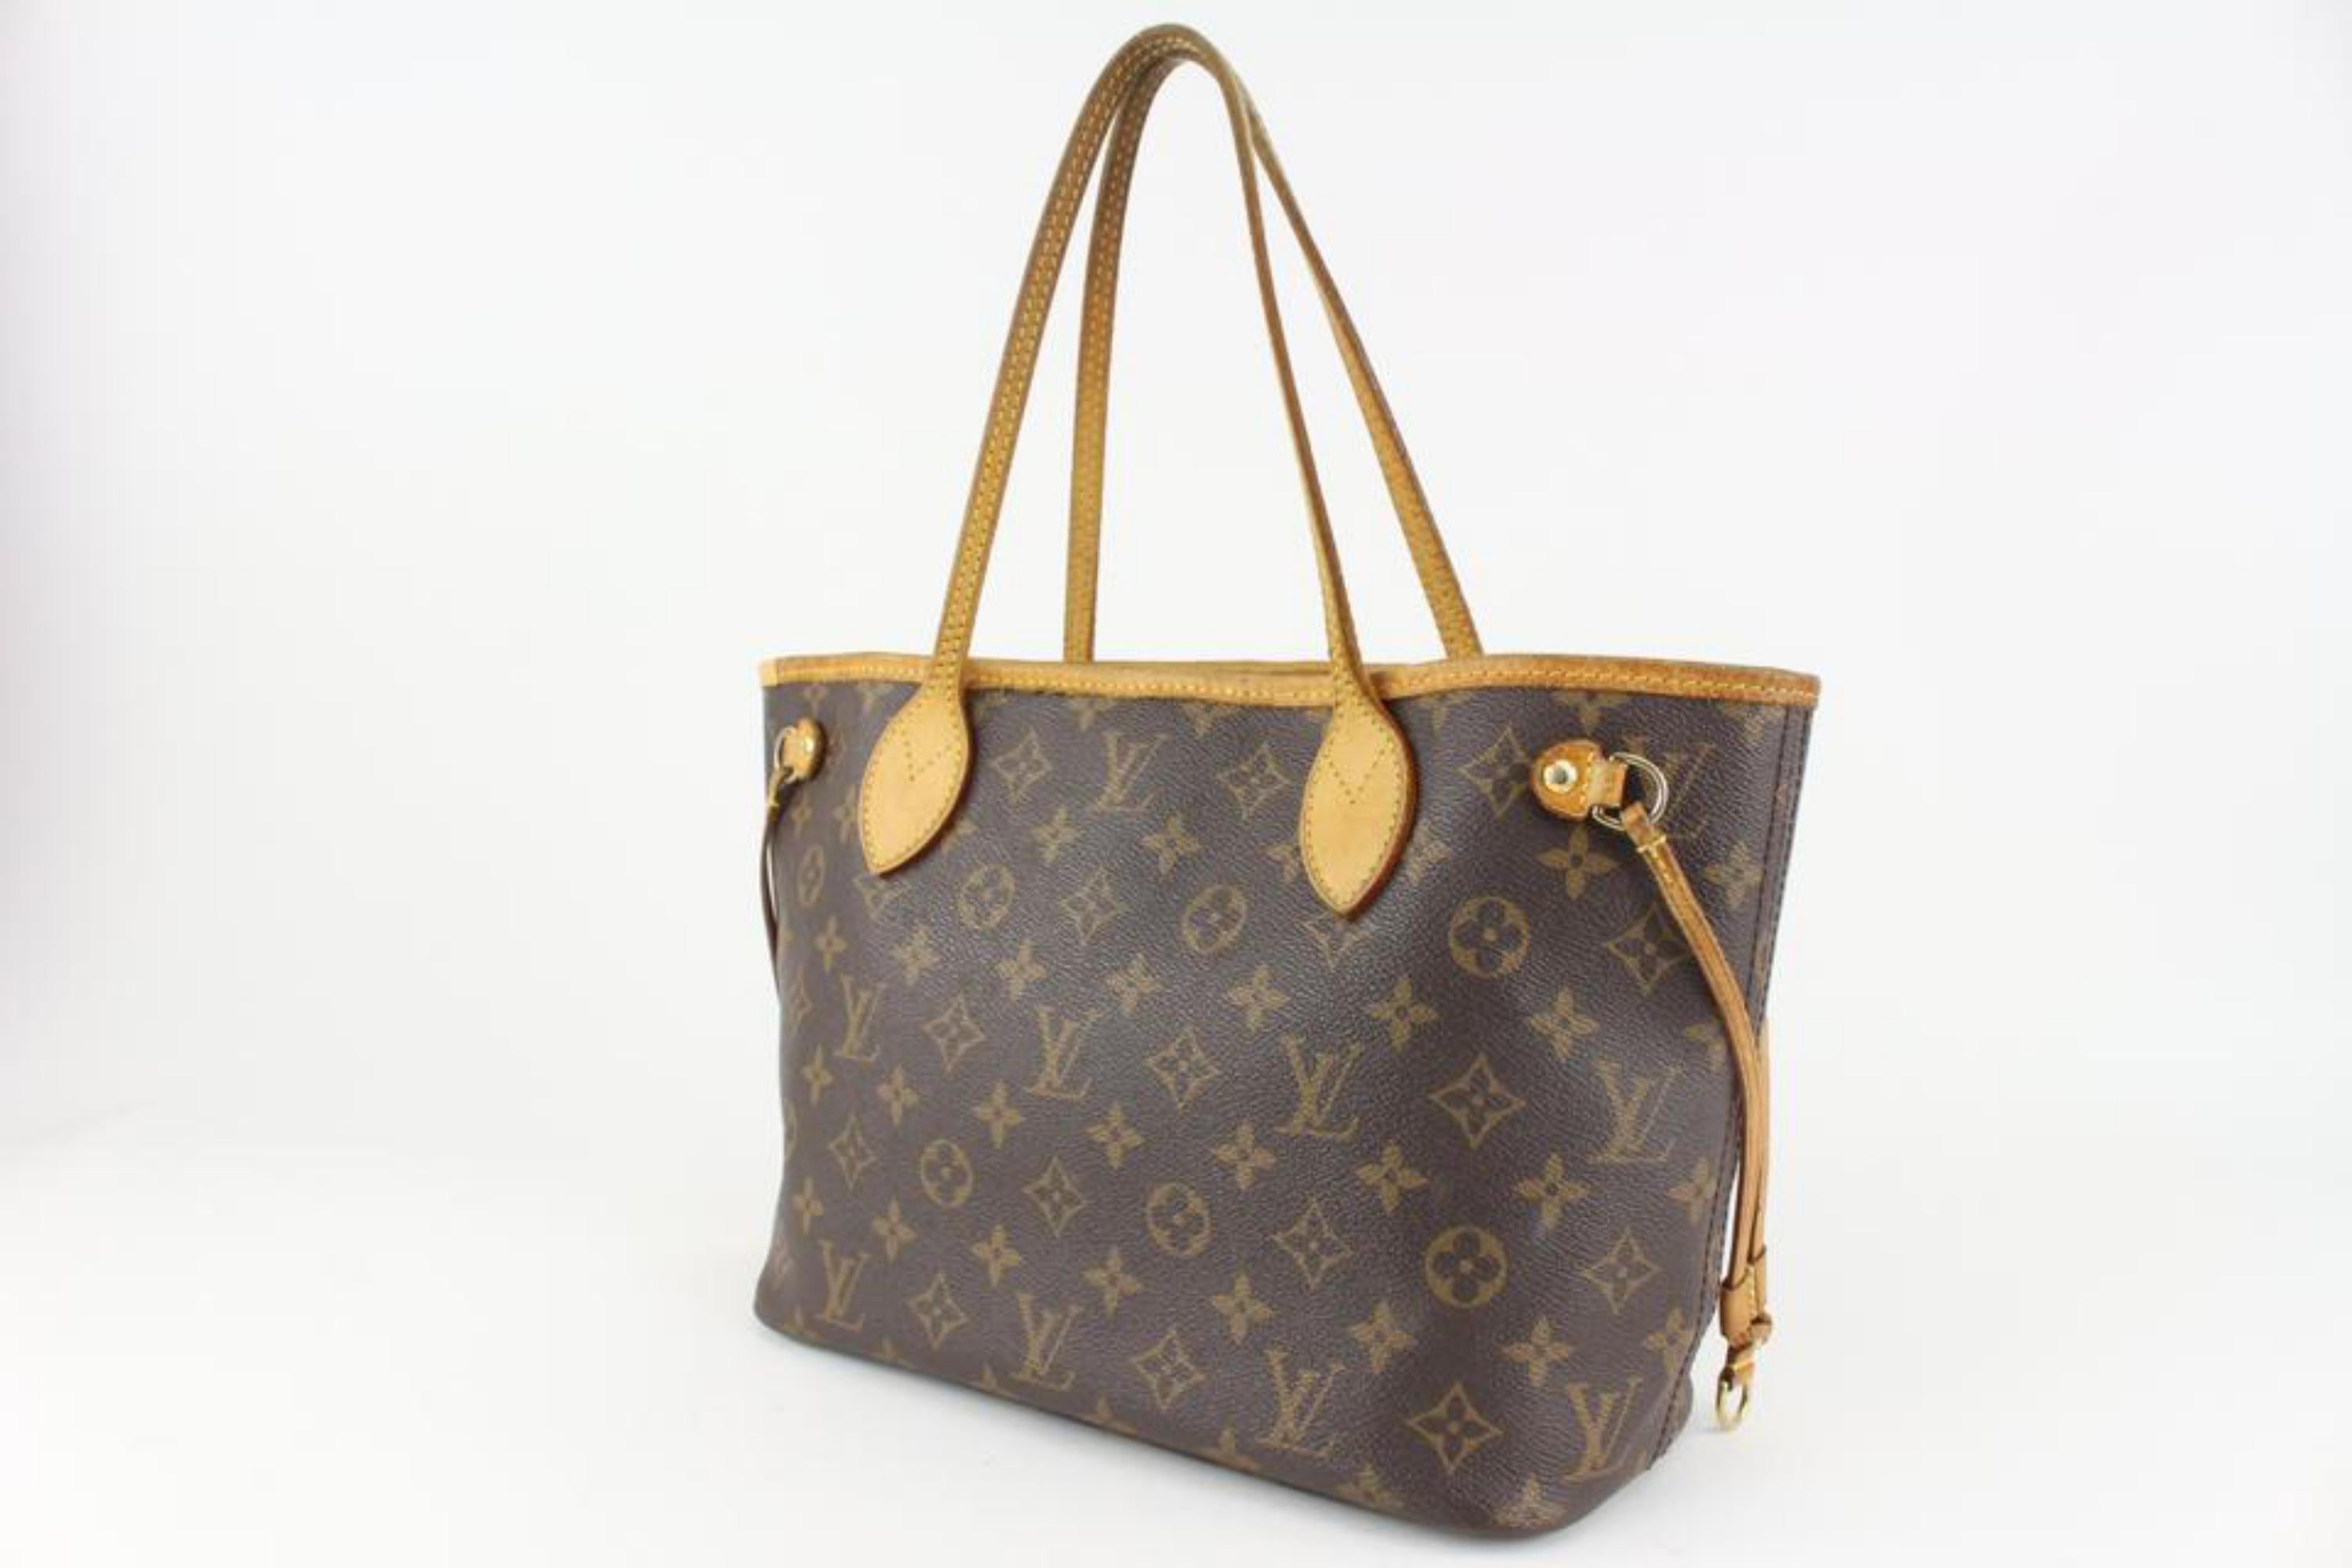 Louis Vuitton Small Monogram Neverfull PM Tote Bag 1215lv6 For Sale 5